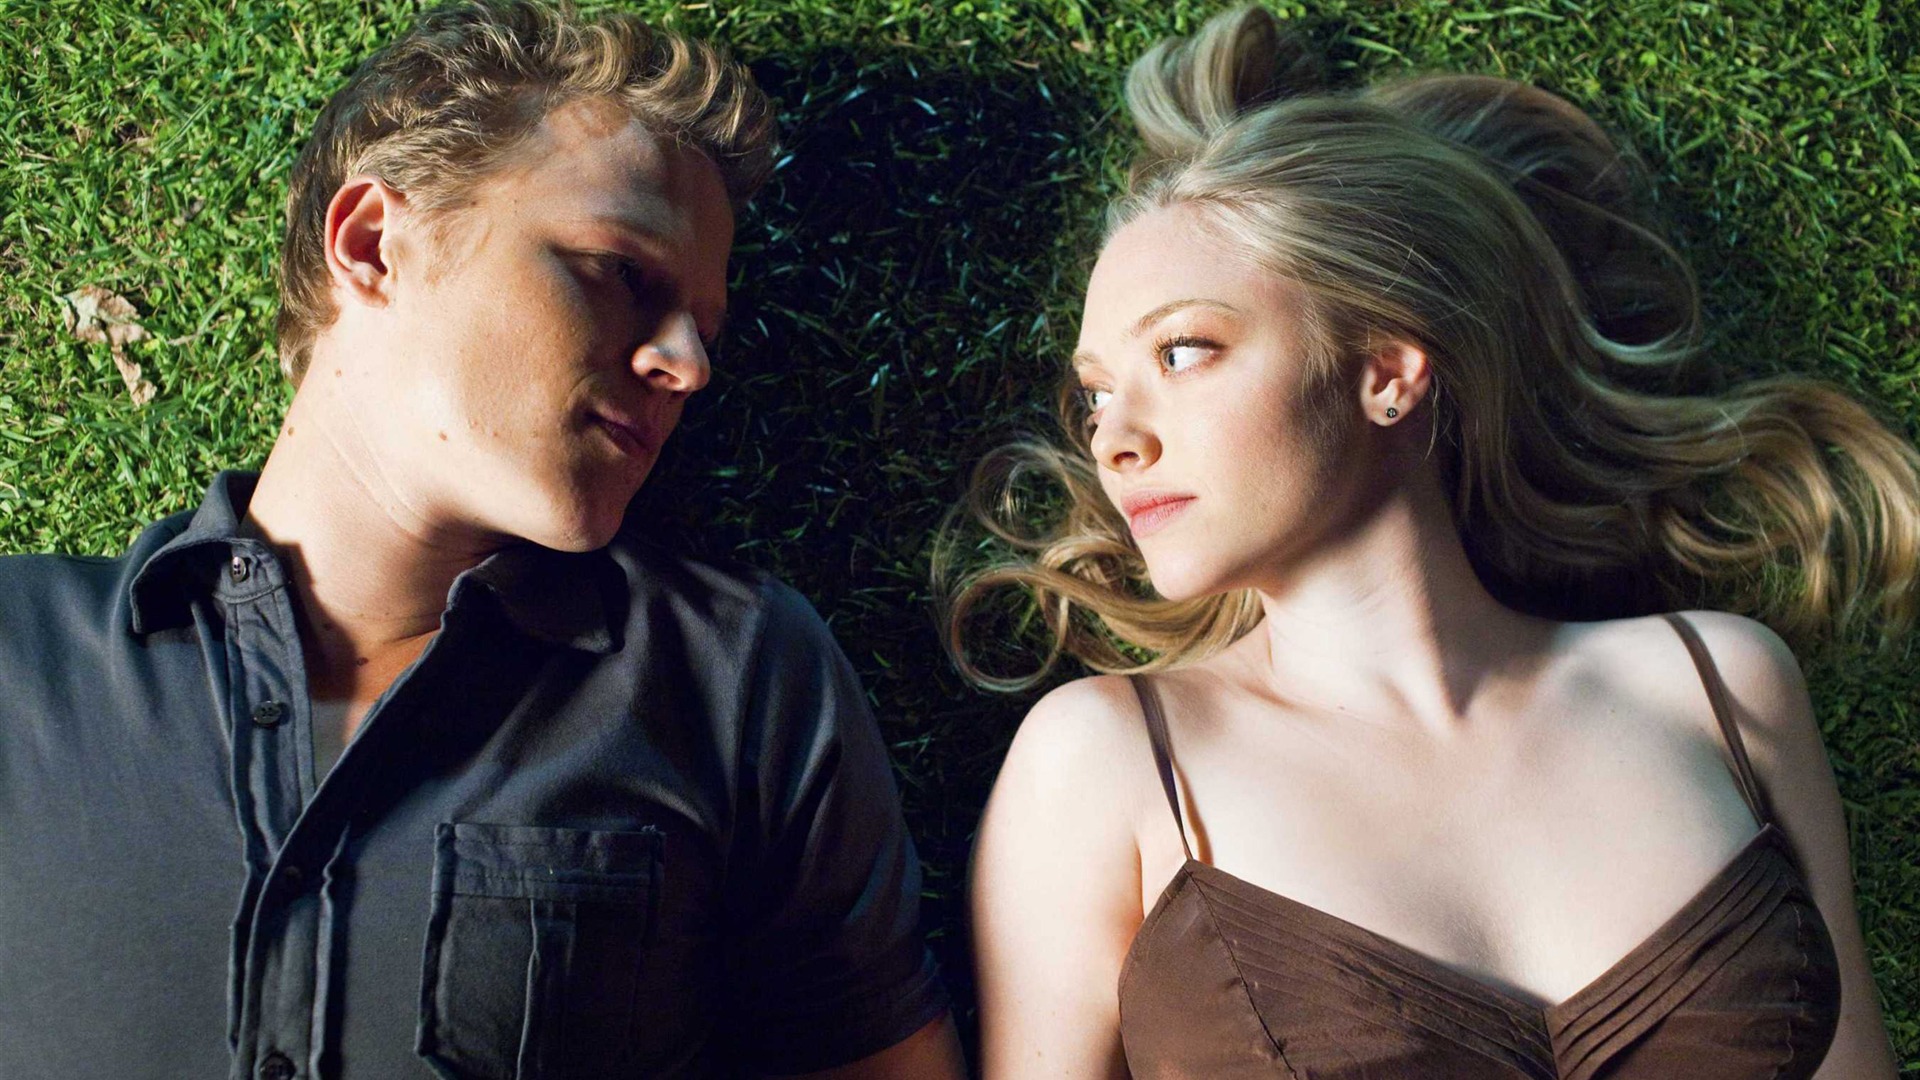 Letters to Juliet 给朱丽叶的信 高清壁纸6 - 1920x1080